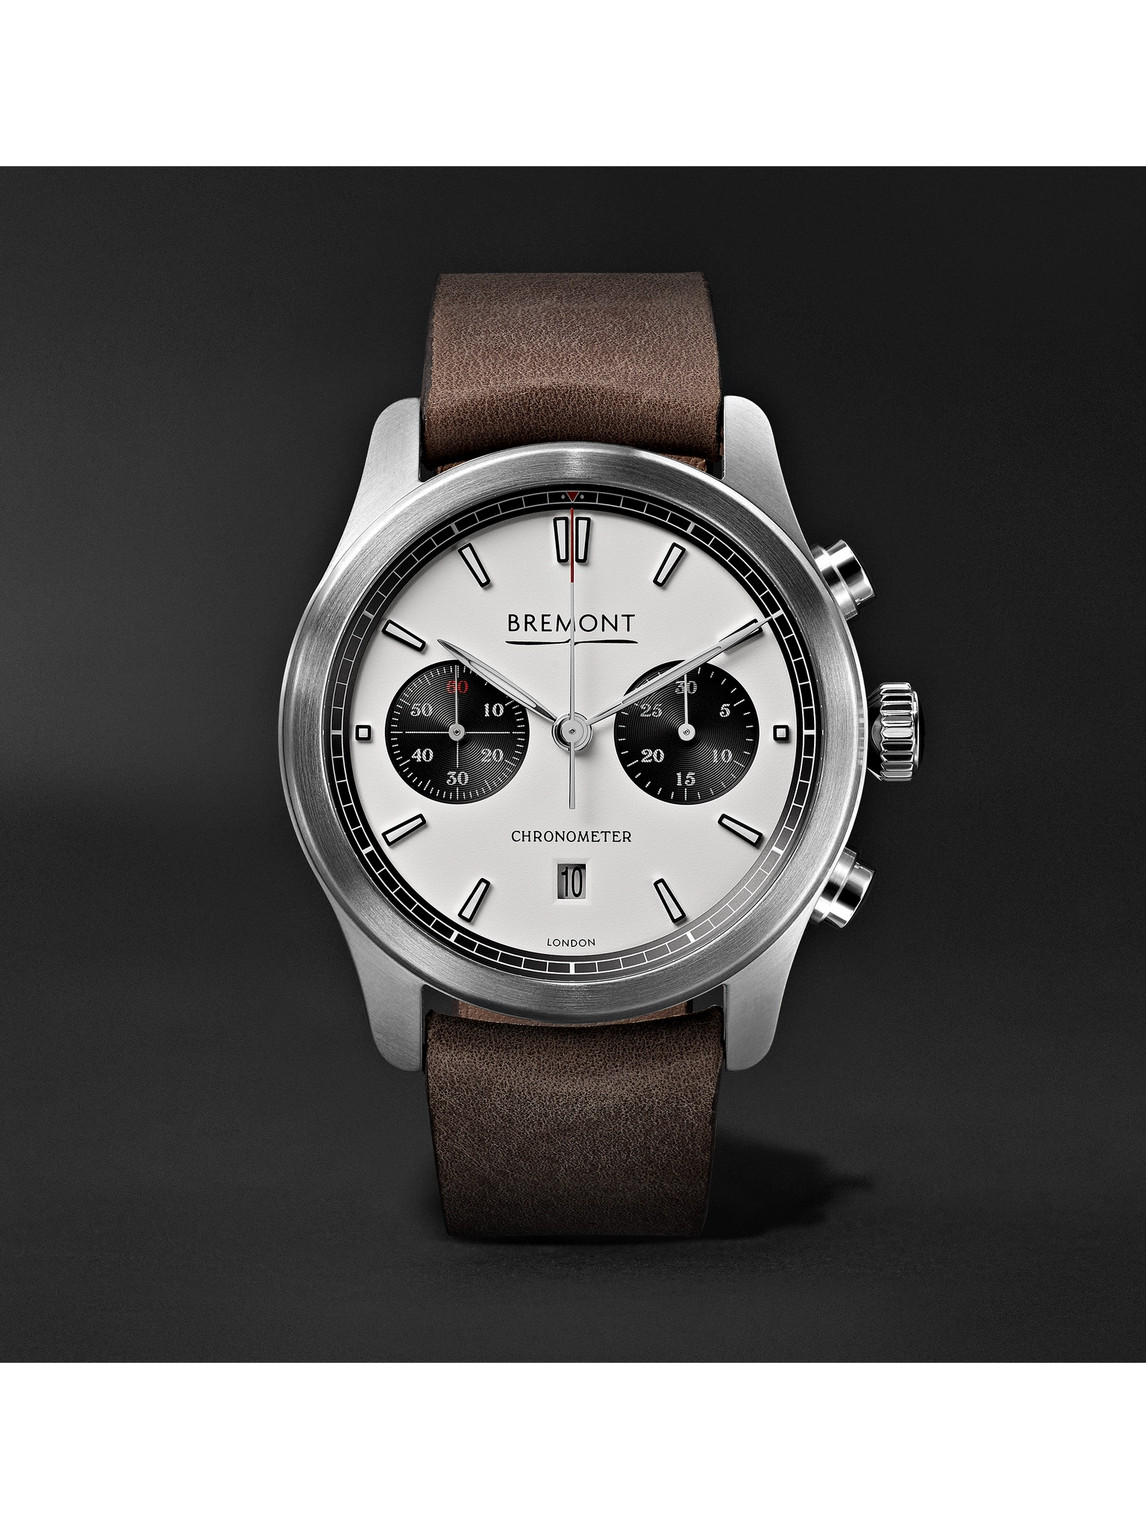 ALT1-C White-Black Automatic Chronograph 43mm Stainless Steel and Leather Watch, Ref. No. ALT1-C/WH-BK